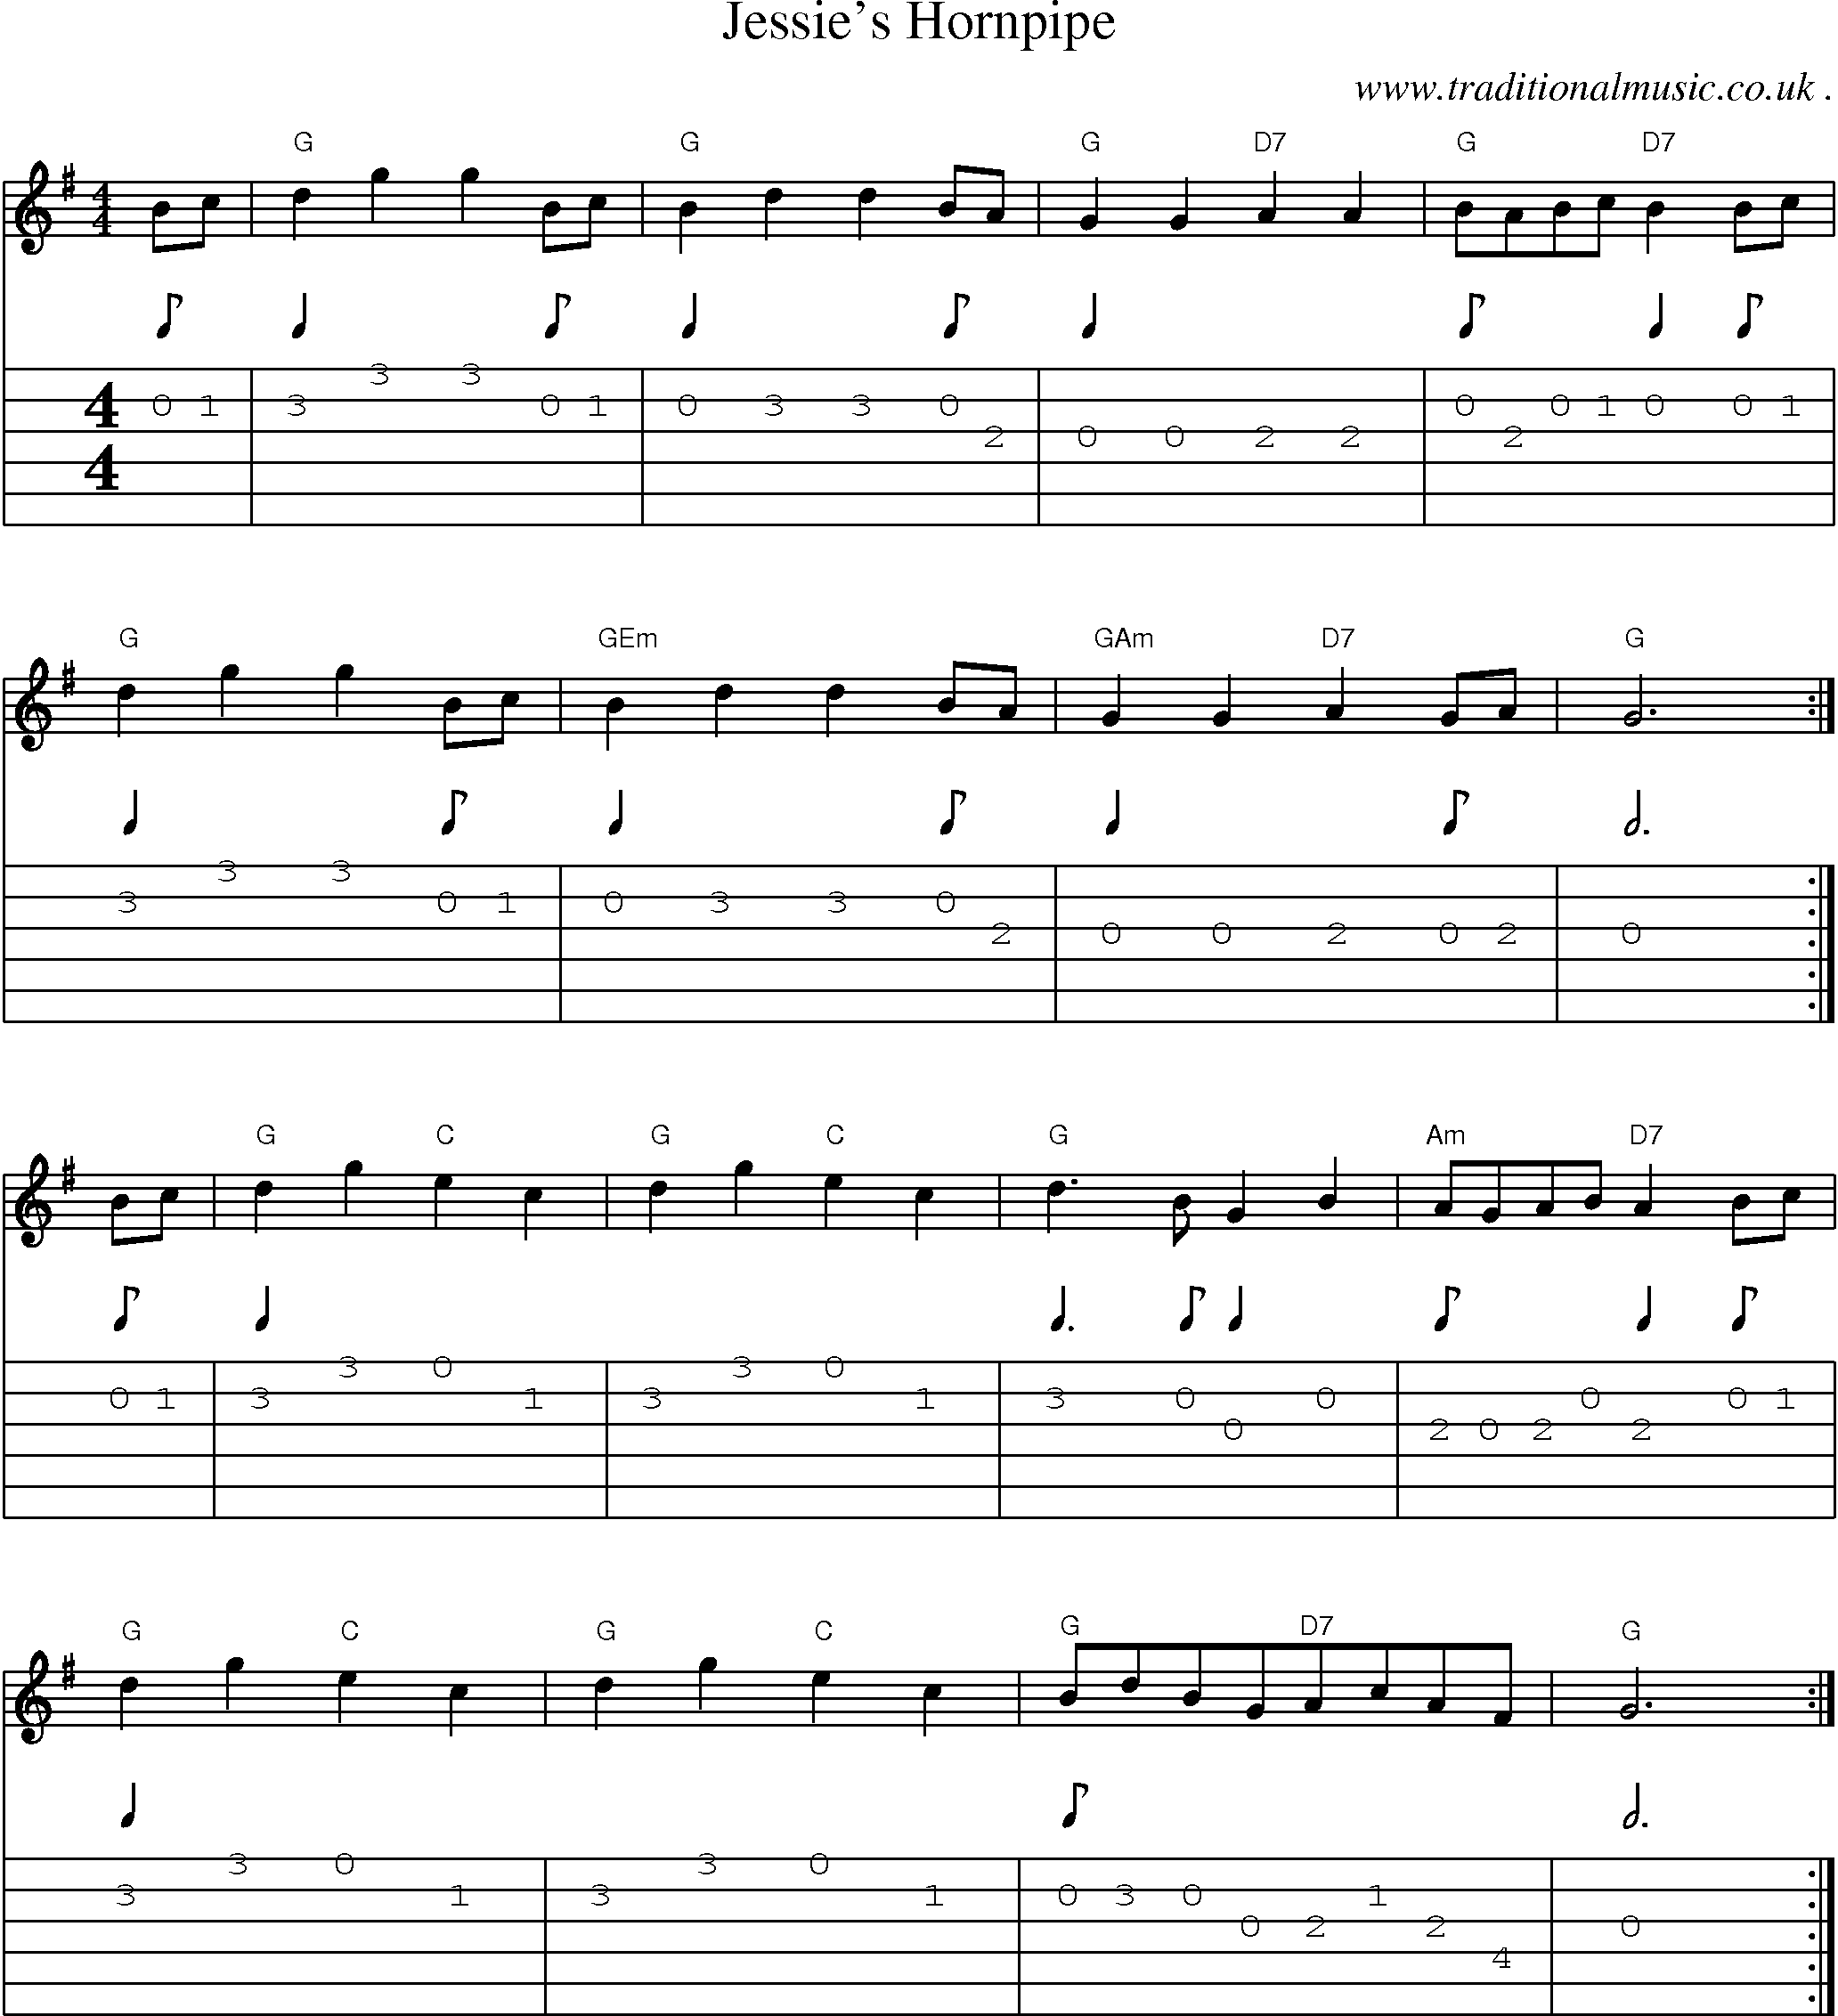 Sheet-Music and Guitar Tabs for Jessies Hornpipe